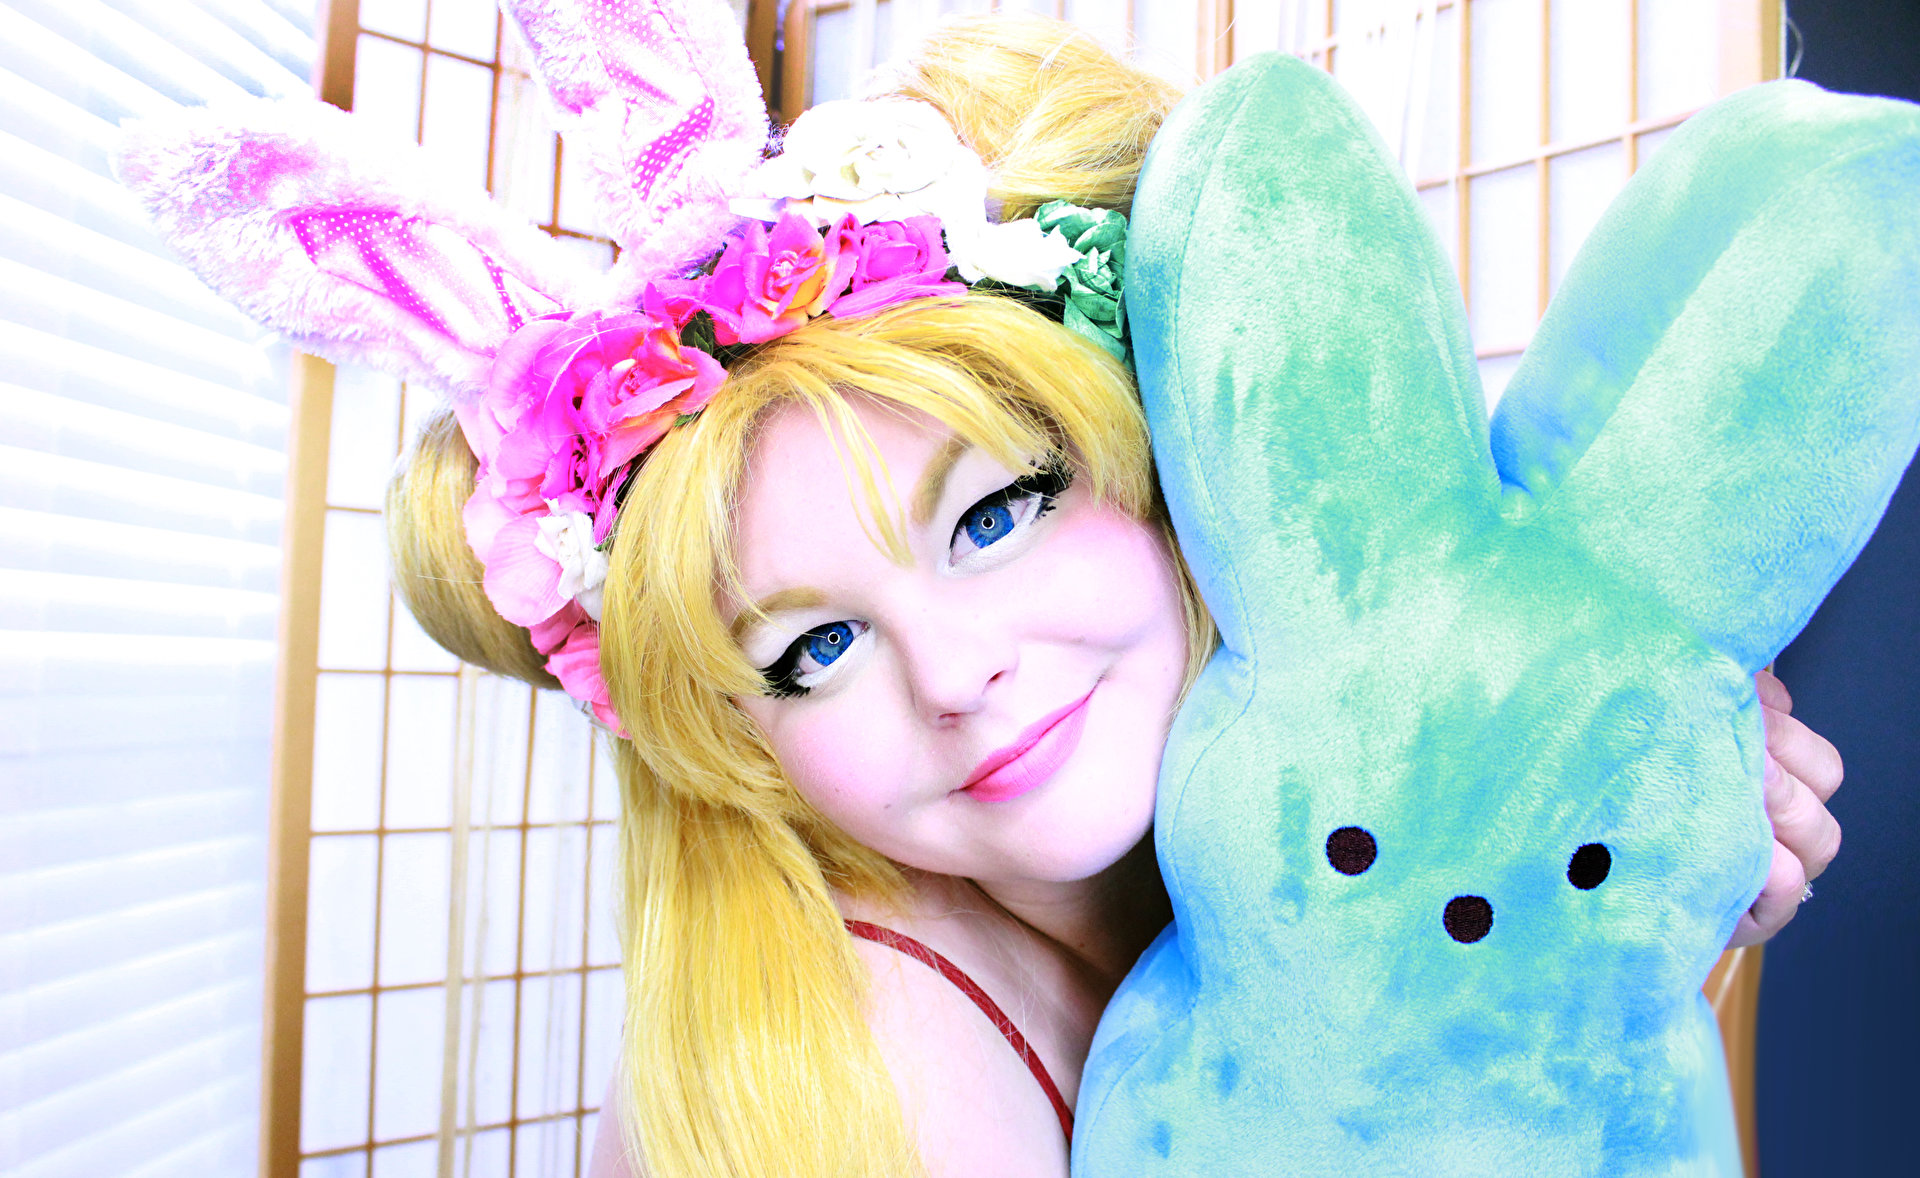 Cospix.net photo featuring BLUE BUNNI COSPLAY